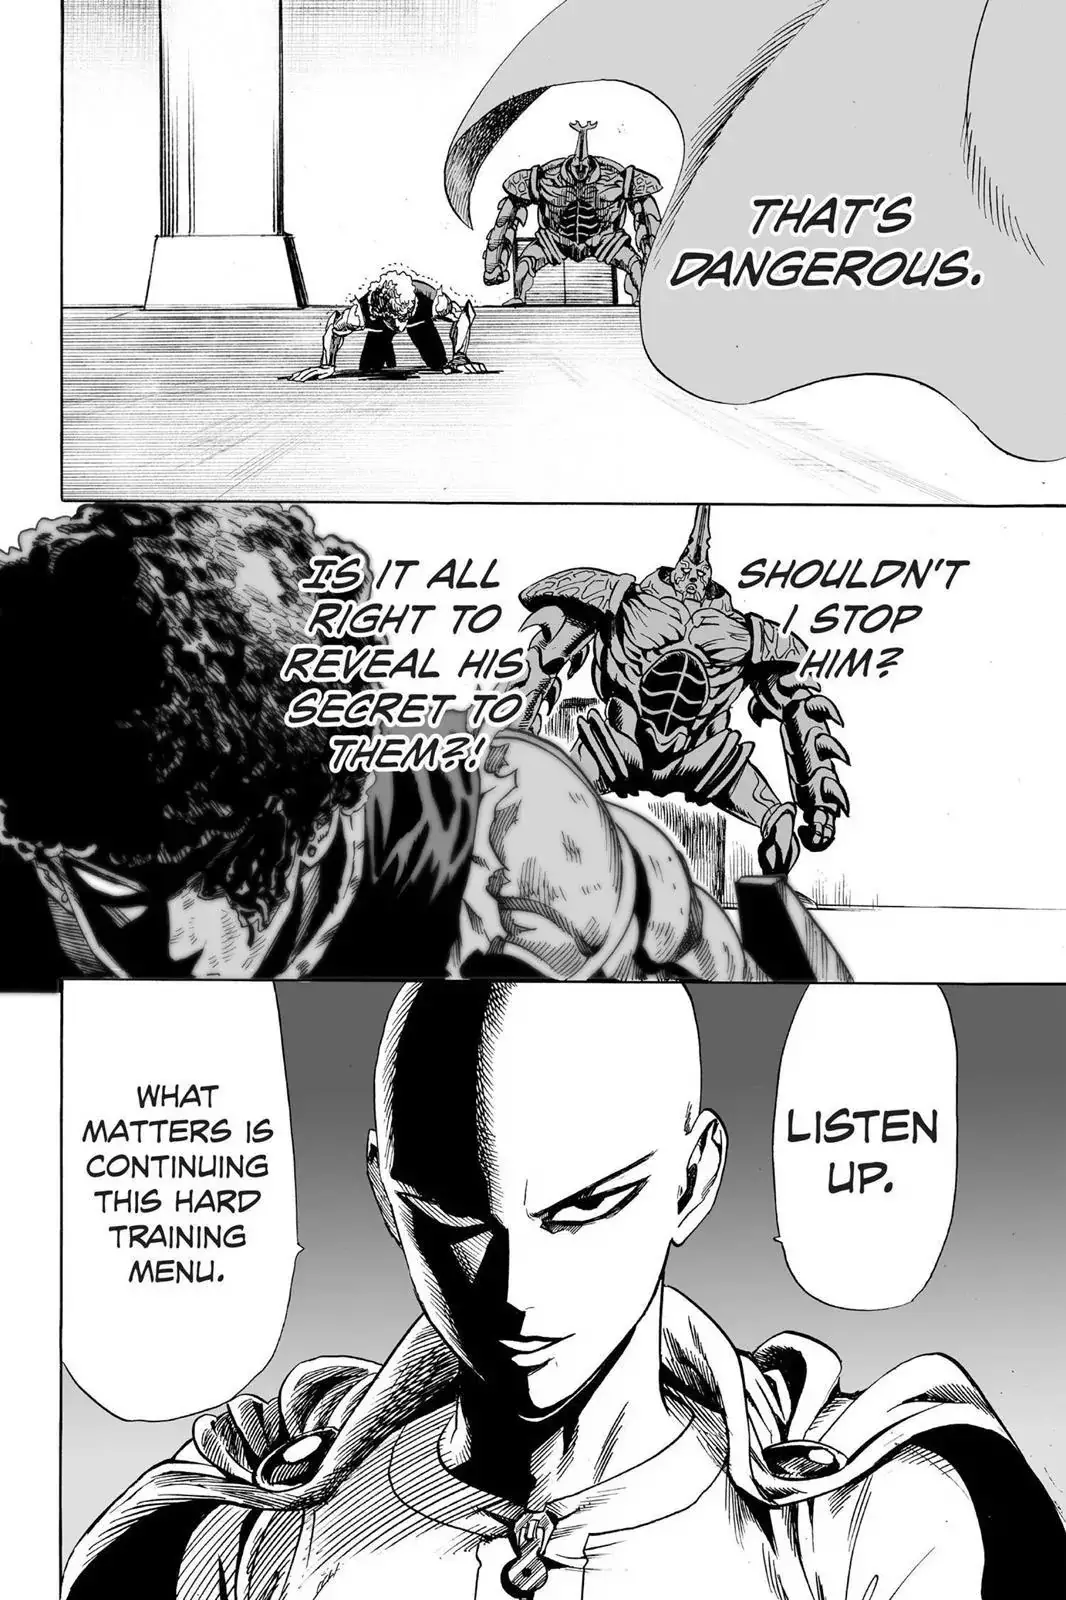 One Punch Man Chapter 11, READ One Punch Man Chapter 11 ONLINE, lost in the cloud genre,lost in the cloud gif,lost in the cloud girl,lost in the cloud goods,lost in the cloud goodreads,lost in the cloud,lost ark cloud gaming,lost odyssey cloud gaming,lost in the cloud fanart,lost in the cloud fanfic,lost in the cloud fandom,lost in the cloud first kiss,lost in the cloud font,lost in the cloud ending,lost in the cloud episode 97,lost in the cloud edit,lost in the cloud explained,lost in the cloud dog,lost in the cloud discord server,lost in the cloud desktop wallpaper,lost in the cloud drawing,can't find my cloud on network,lost in the cloud characters,lost in the cloud chapter 93 release date,lost in the cloud birthday,lost in the cloud birthday art,lost in the cloud background,lost in the cloud banner,lost in the clouds meaning,what is the black cloud in lost,lost in the cloud ao3,lost in the cloud anime,lost in the cloud art,lost in the cloud author twitter,lost in the cloud author instagram,lost in the cloud artist,lost in the cloud acrylic stand,lost in the cloud artist twitter,lost in the cloud art style,lost in the cloud analysis